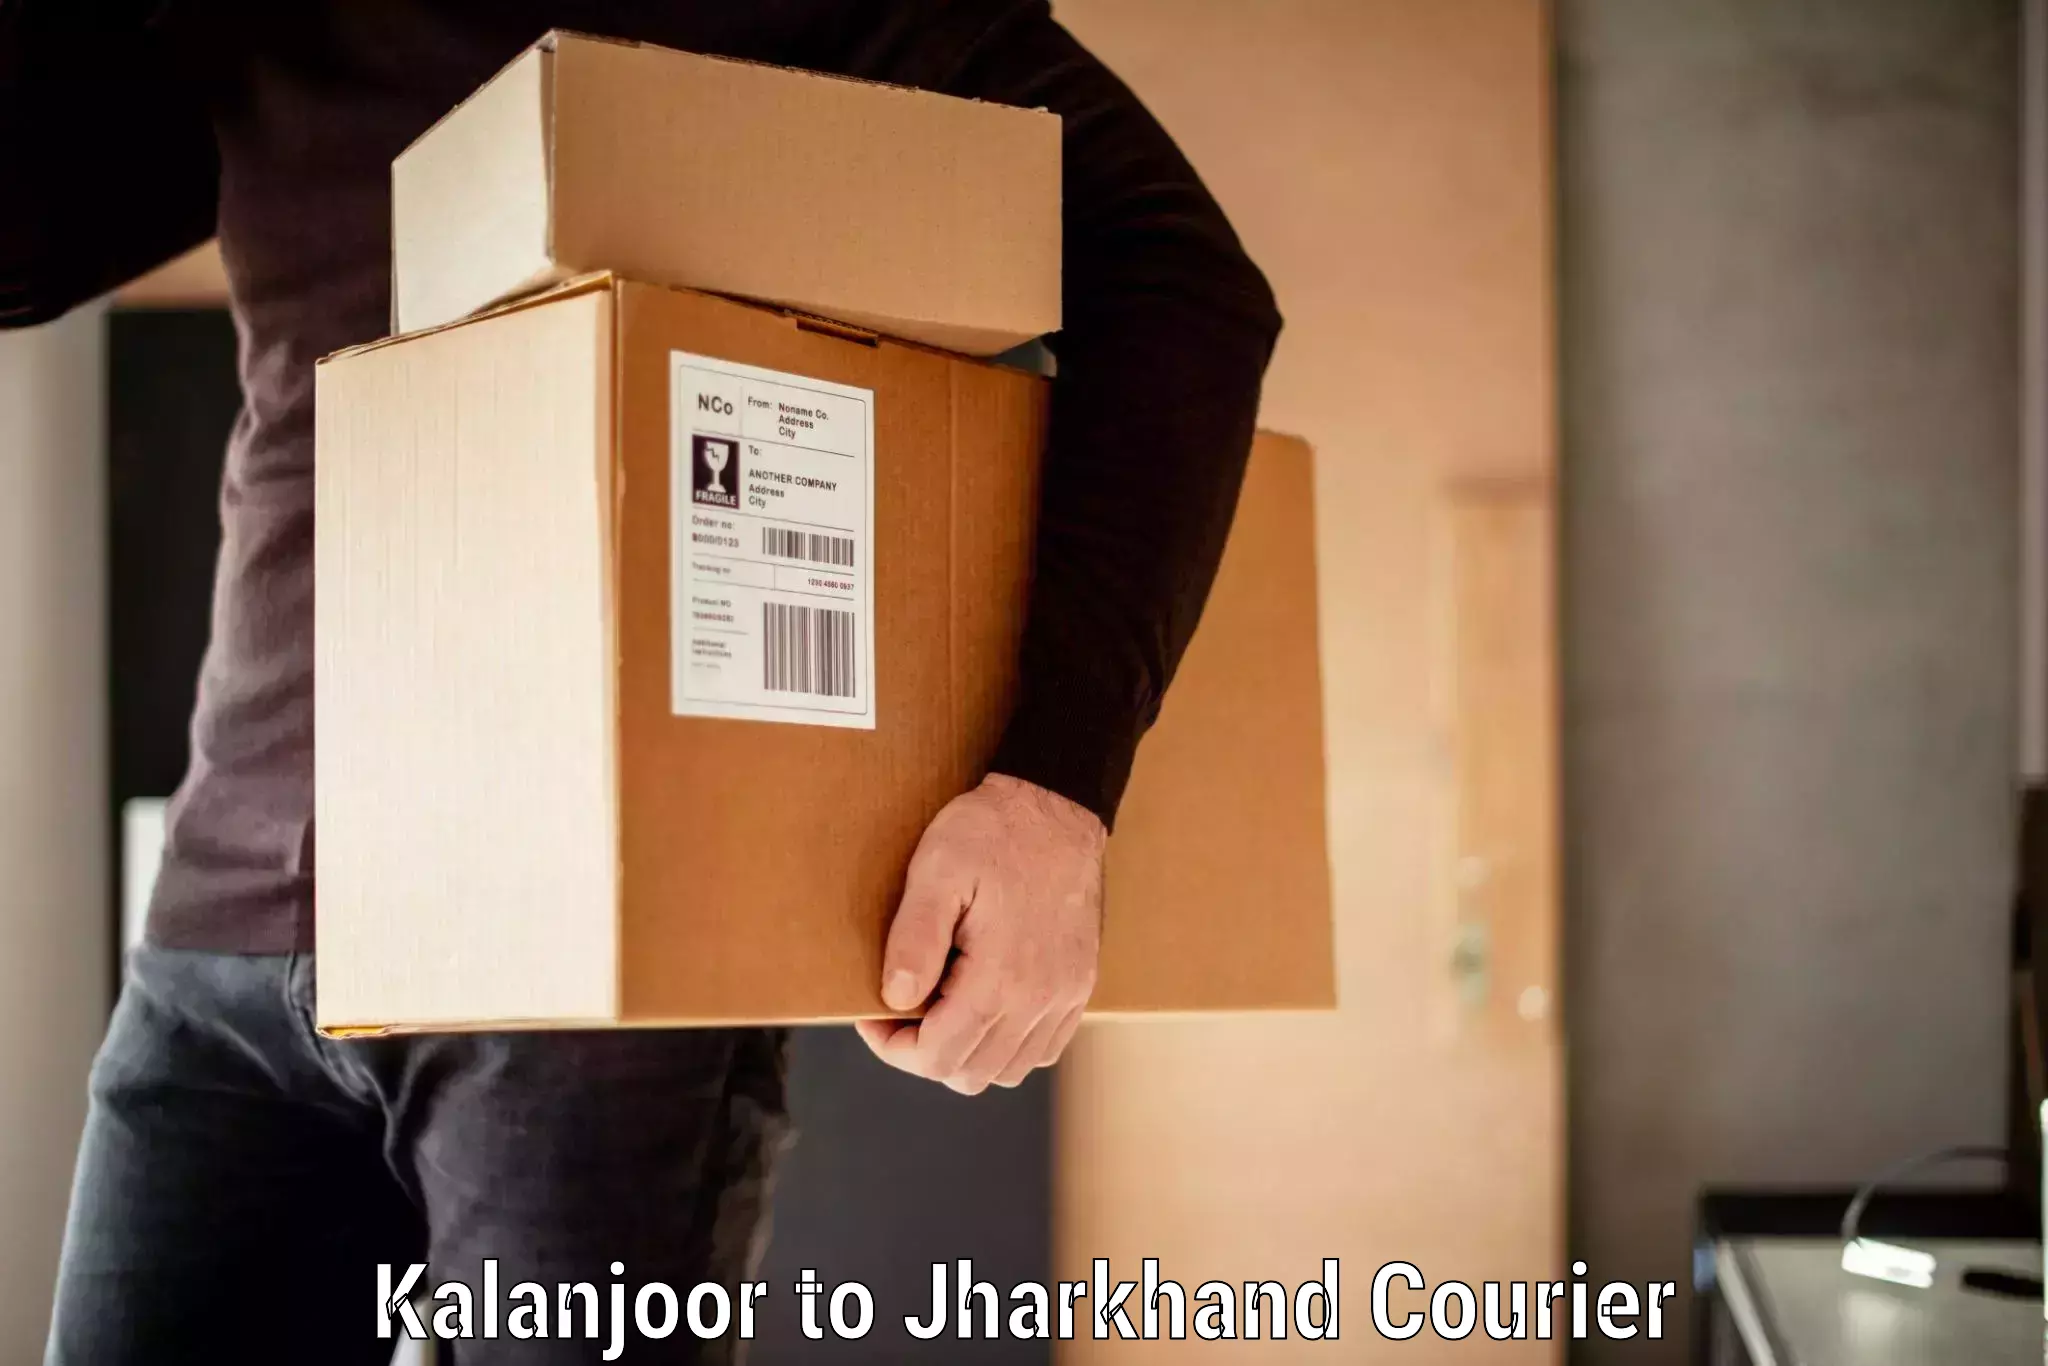 Personal effects shipping Kalanjoor to Jamshedpur